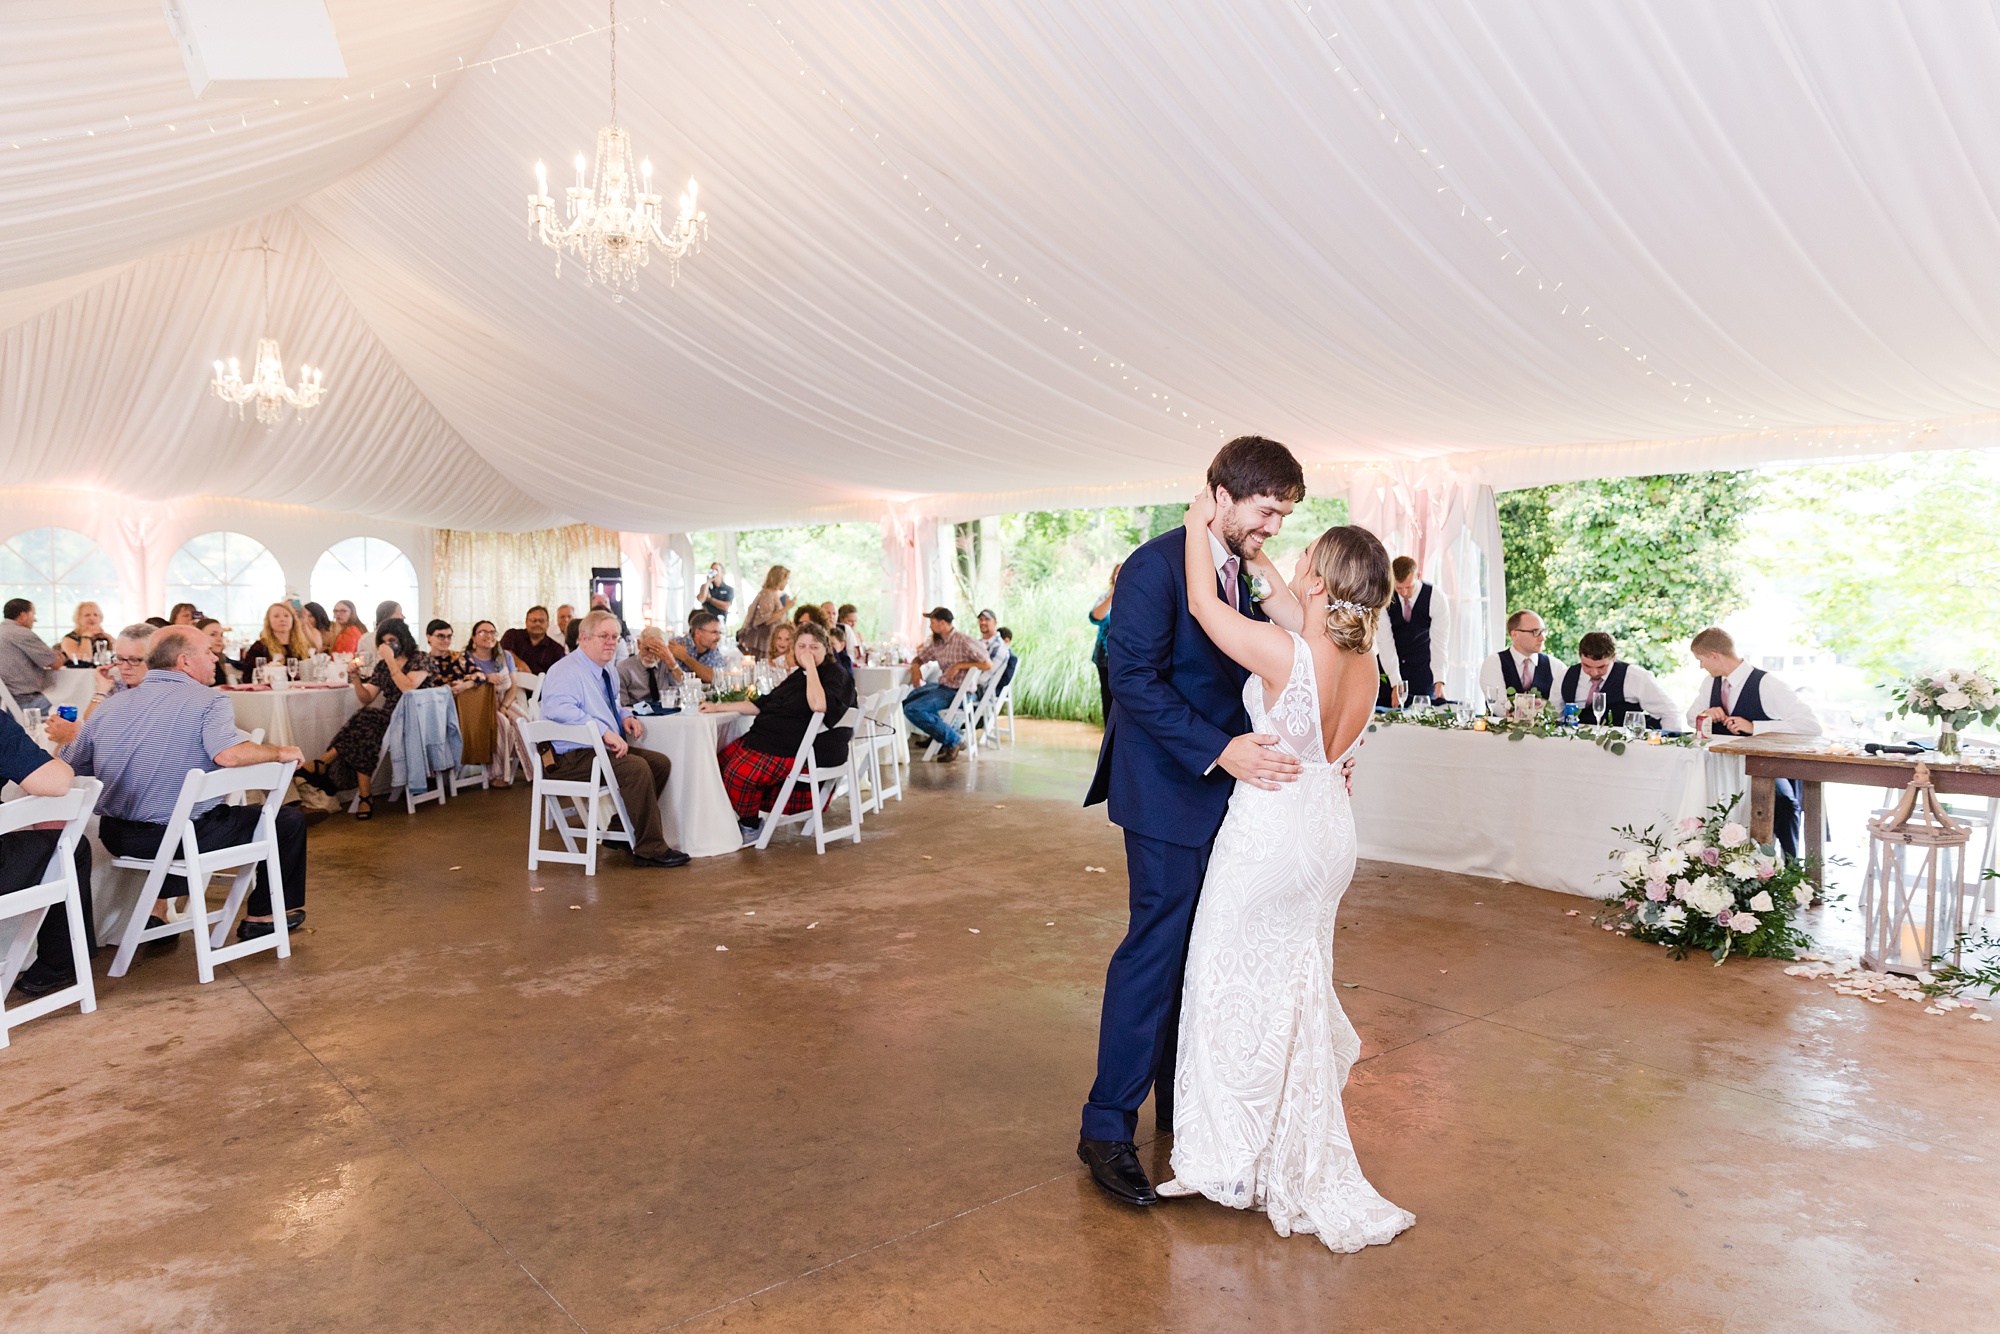 newlyweds dance together at PA wedding reception